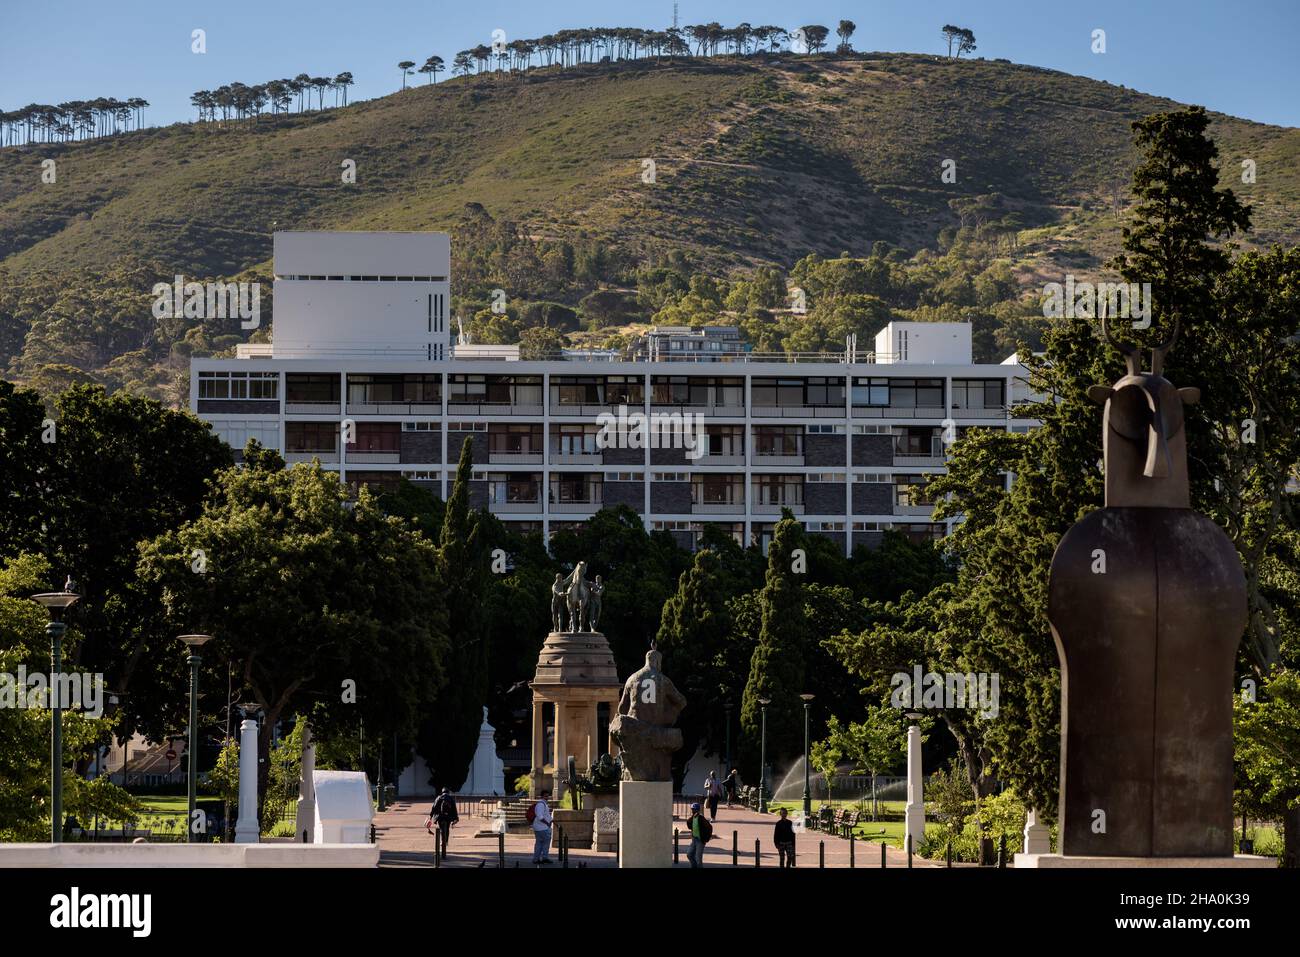 Cape Town's Company Garden's with the backdrop of Signal Hill, part of the city's topography that makes it distinctive and globally recognisable Stock Photo